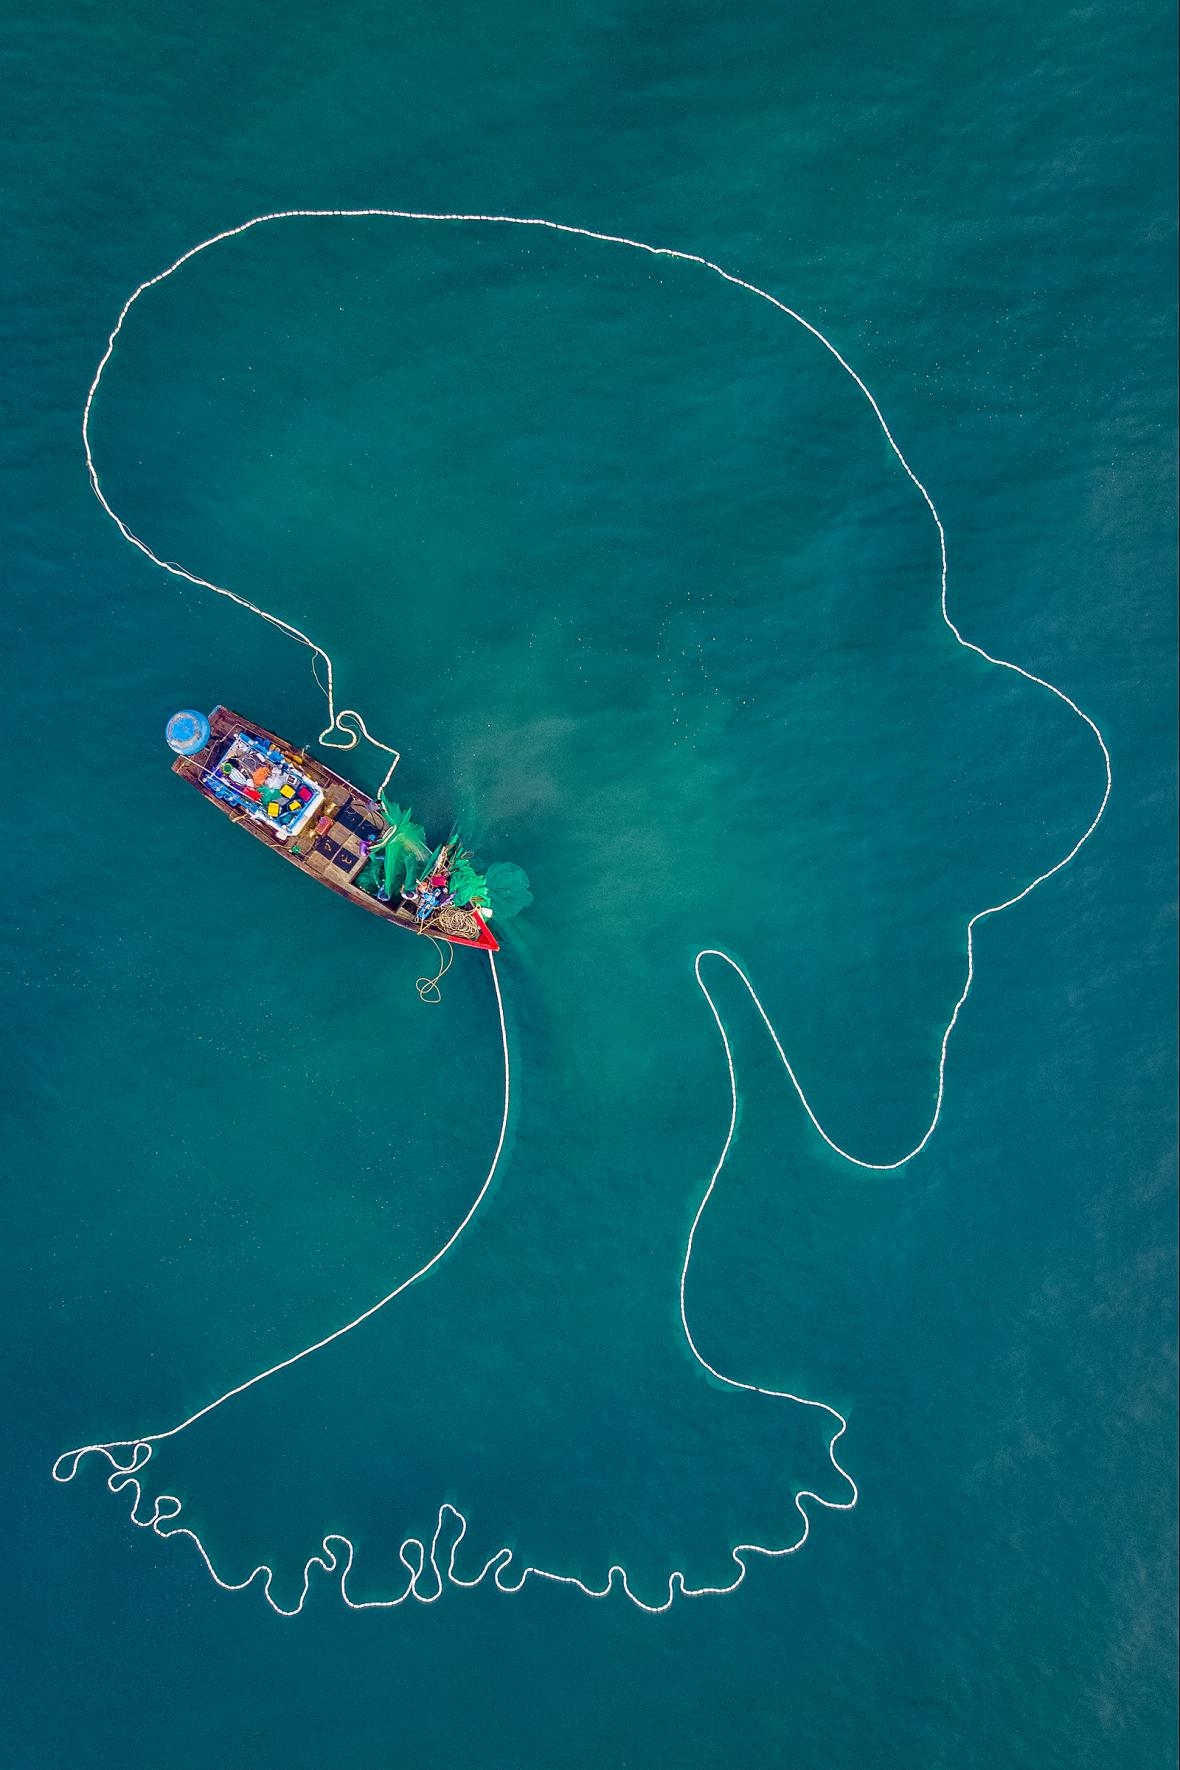 Five photos taken by Vietnamese photographers won Aerial Photography Awards